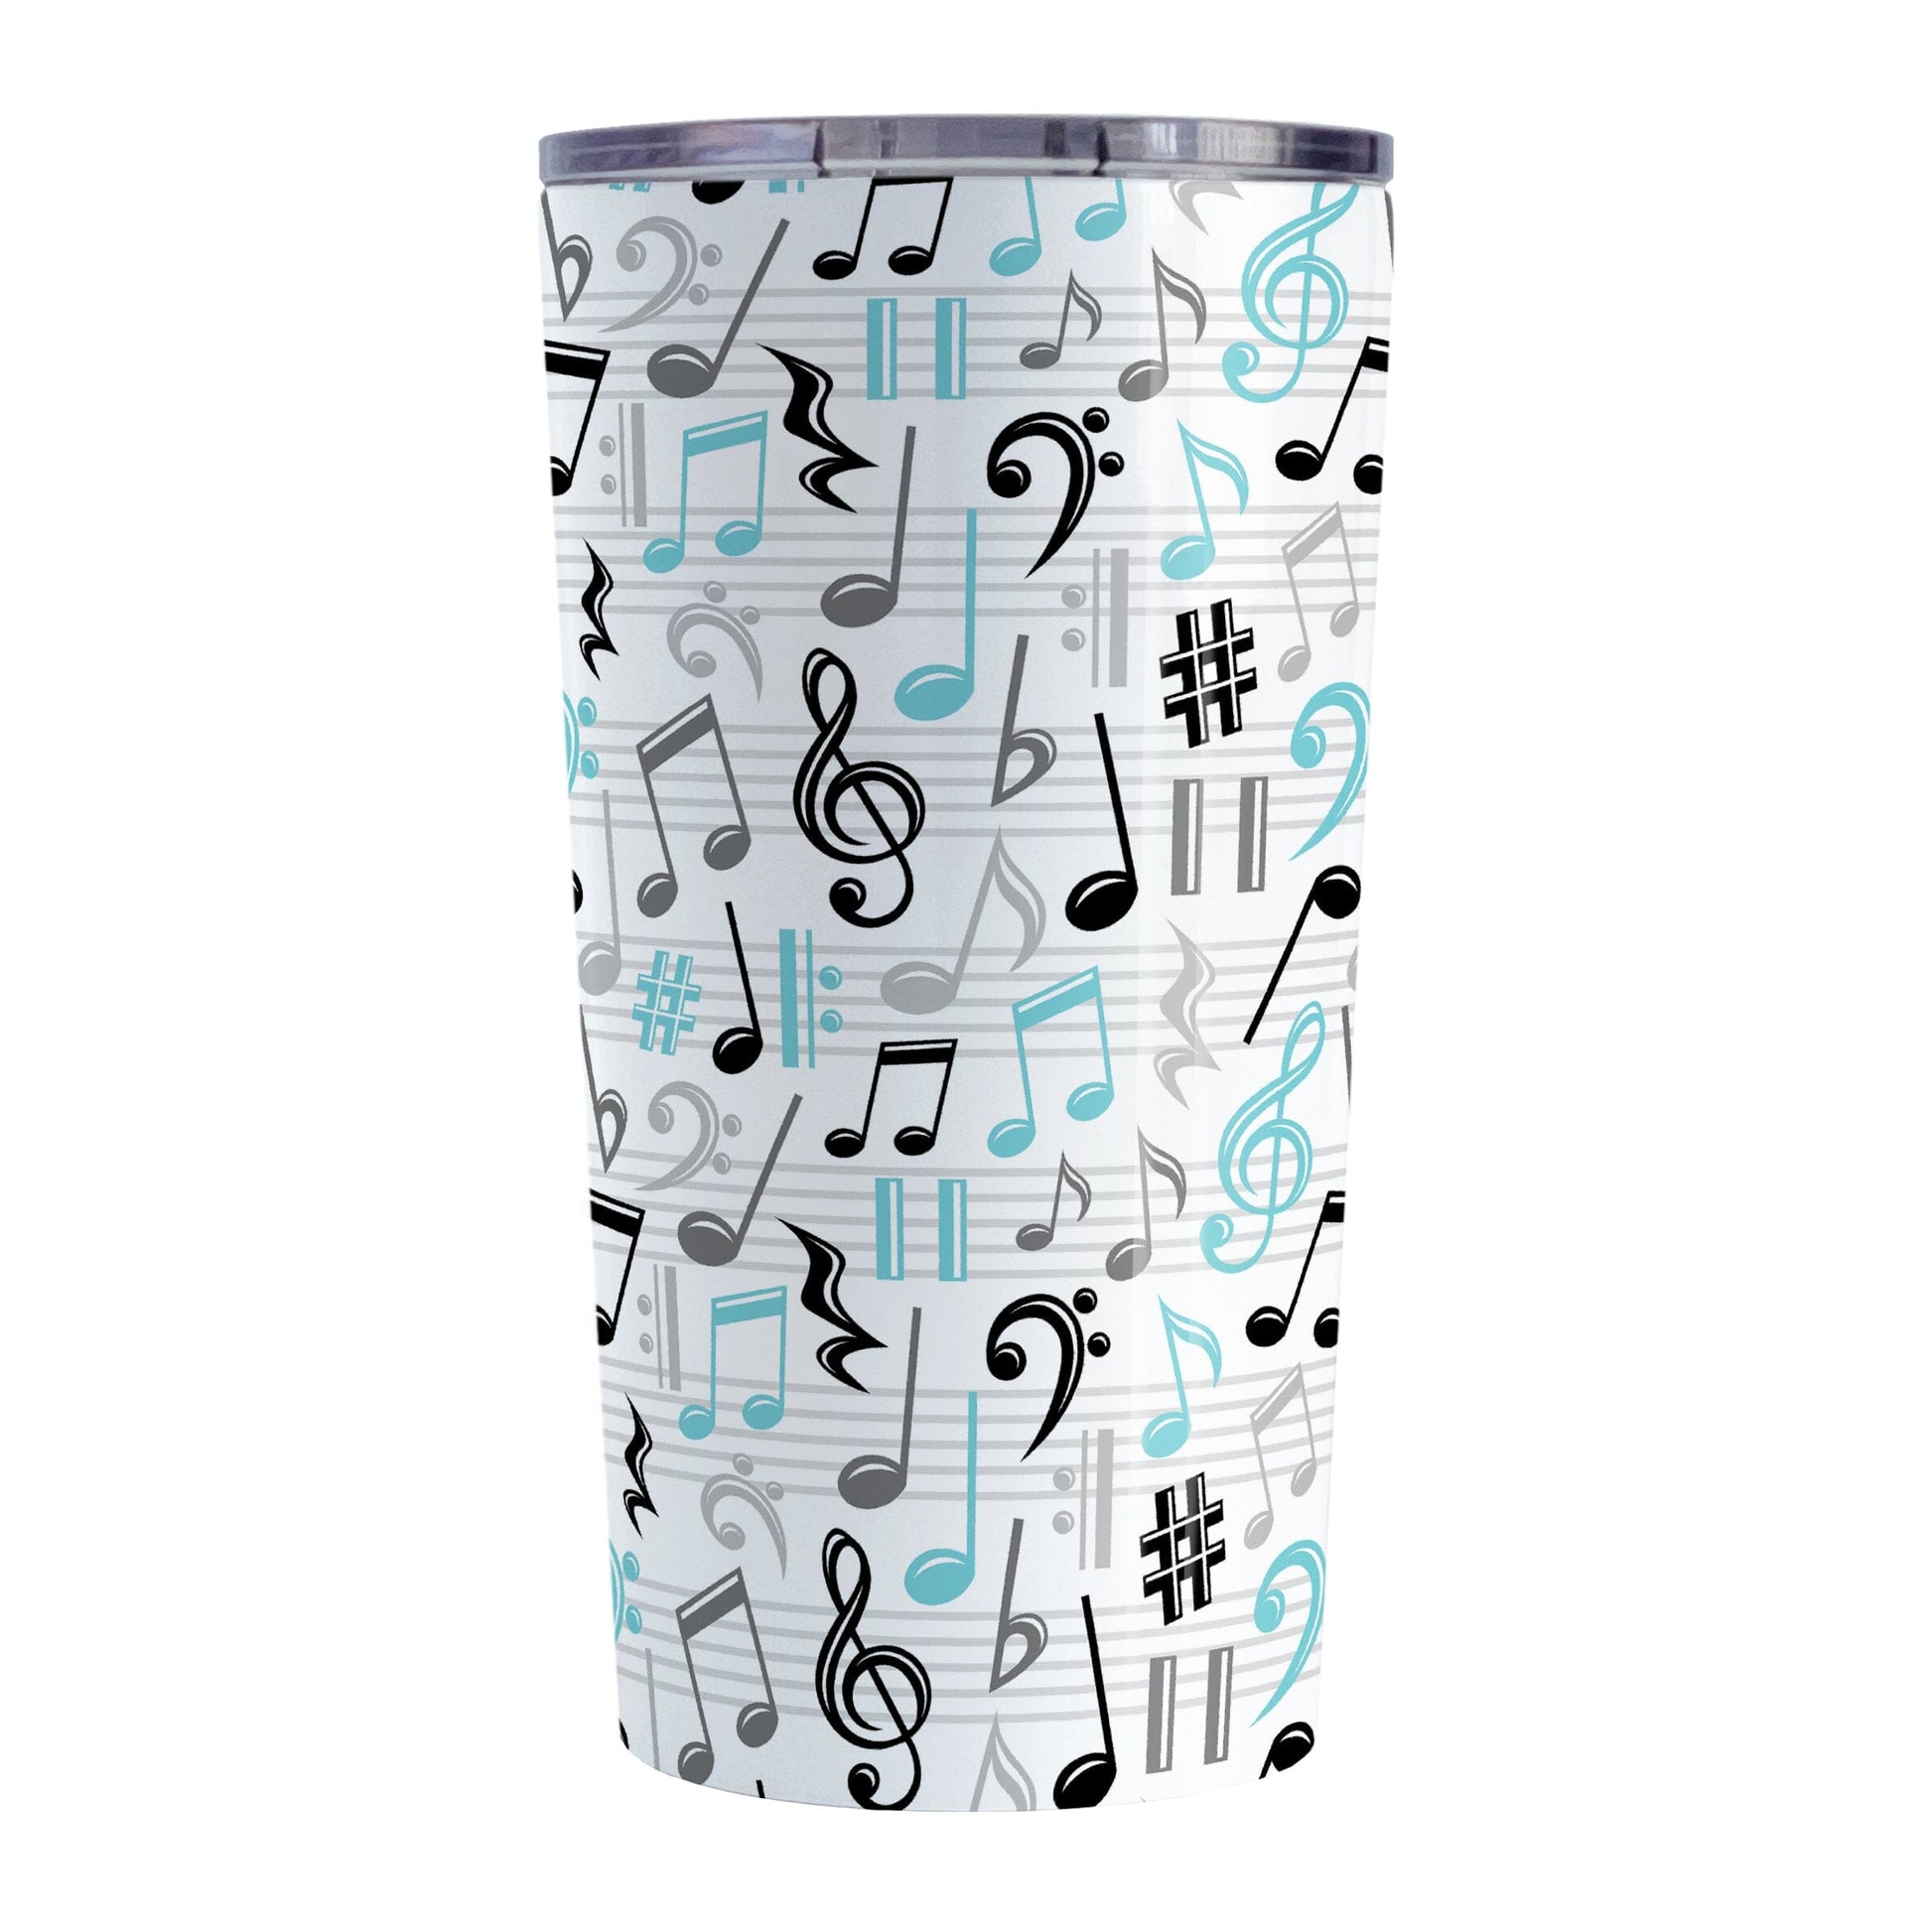 Turquoise Music Notes Pattern Tumbler Cup (20oz) at Amy's Coffee Mugs. A stainless steel tumbler cup designed with music notes and symbols in turquoise, black, and gray in a pattern that wraps around the cup.